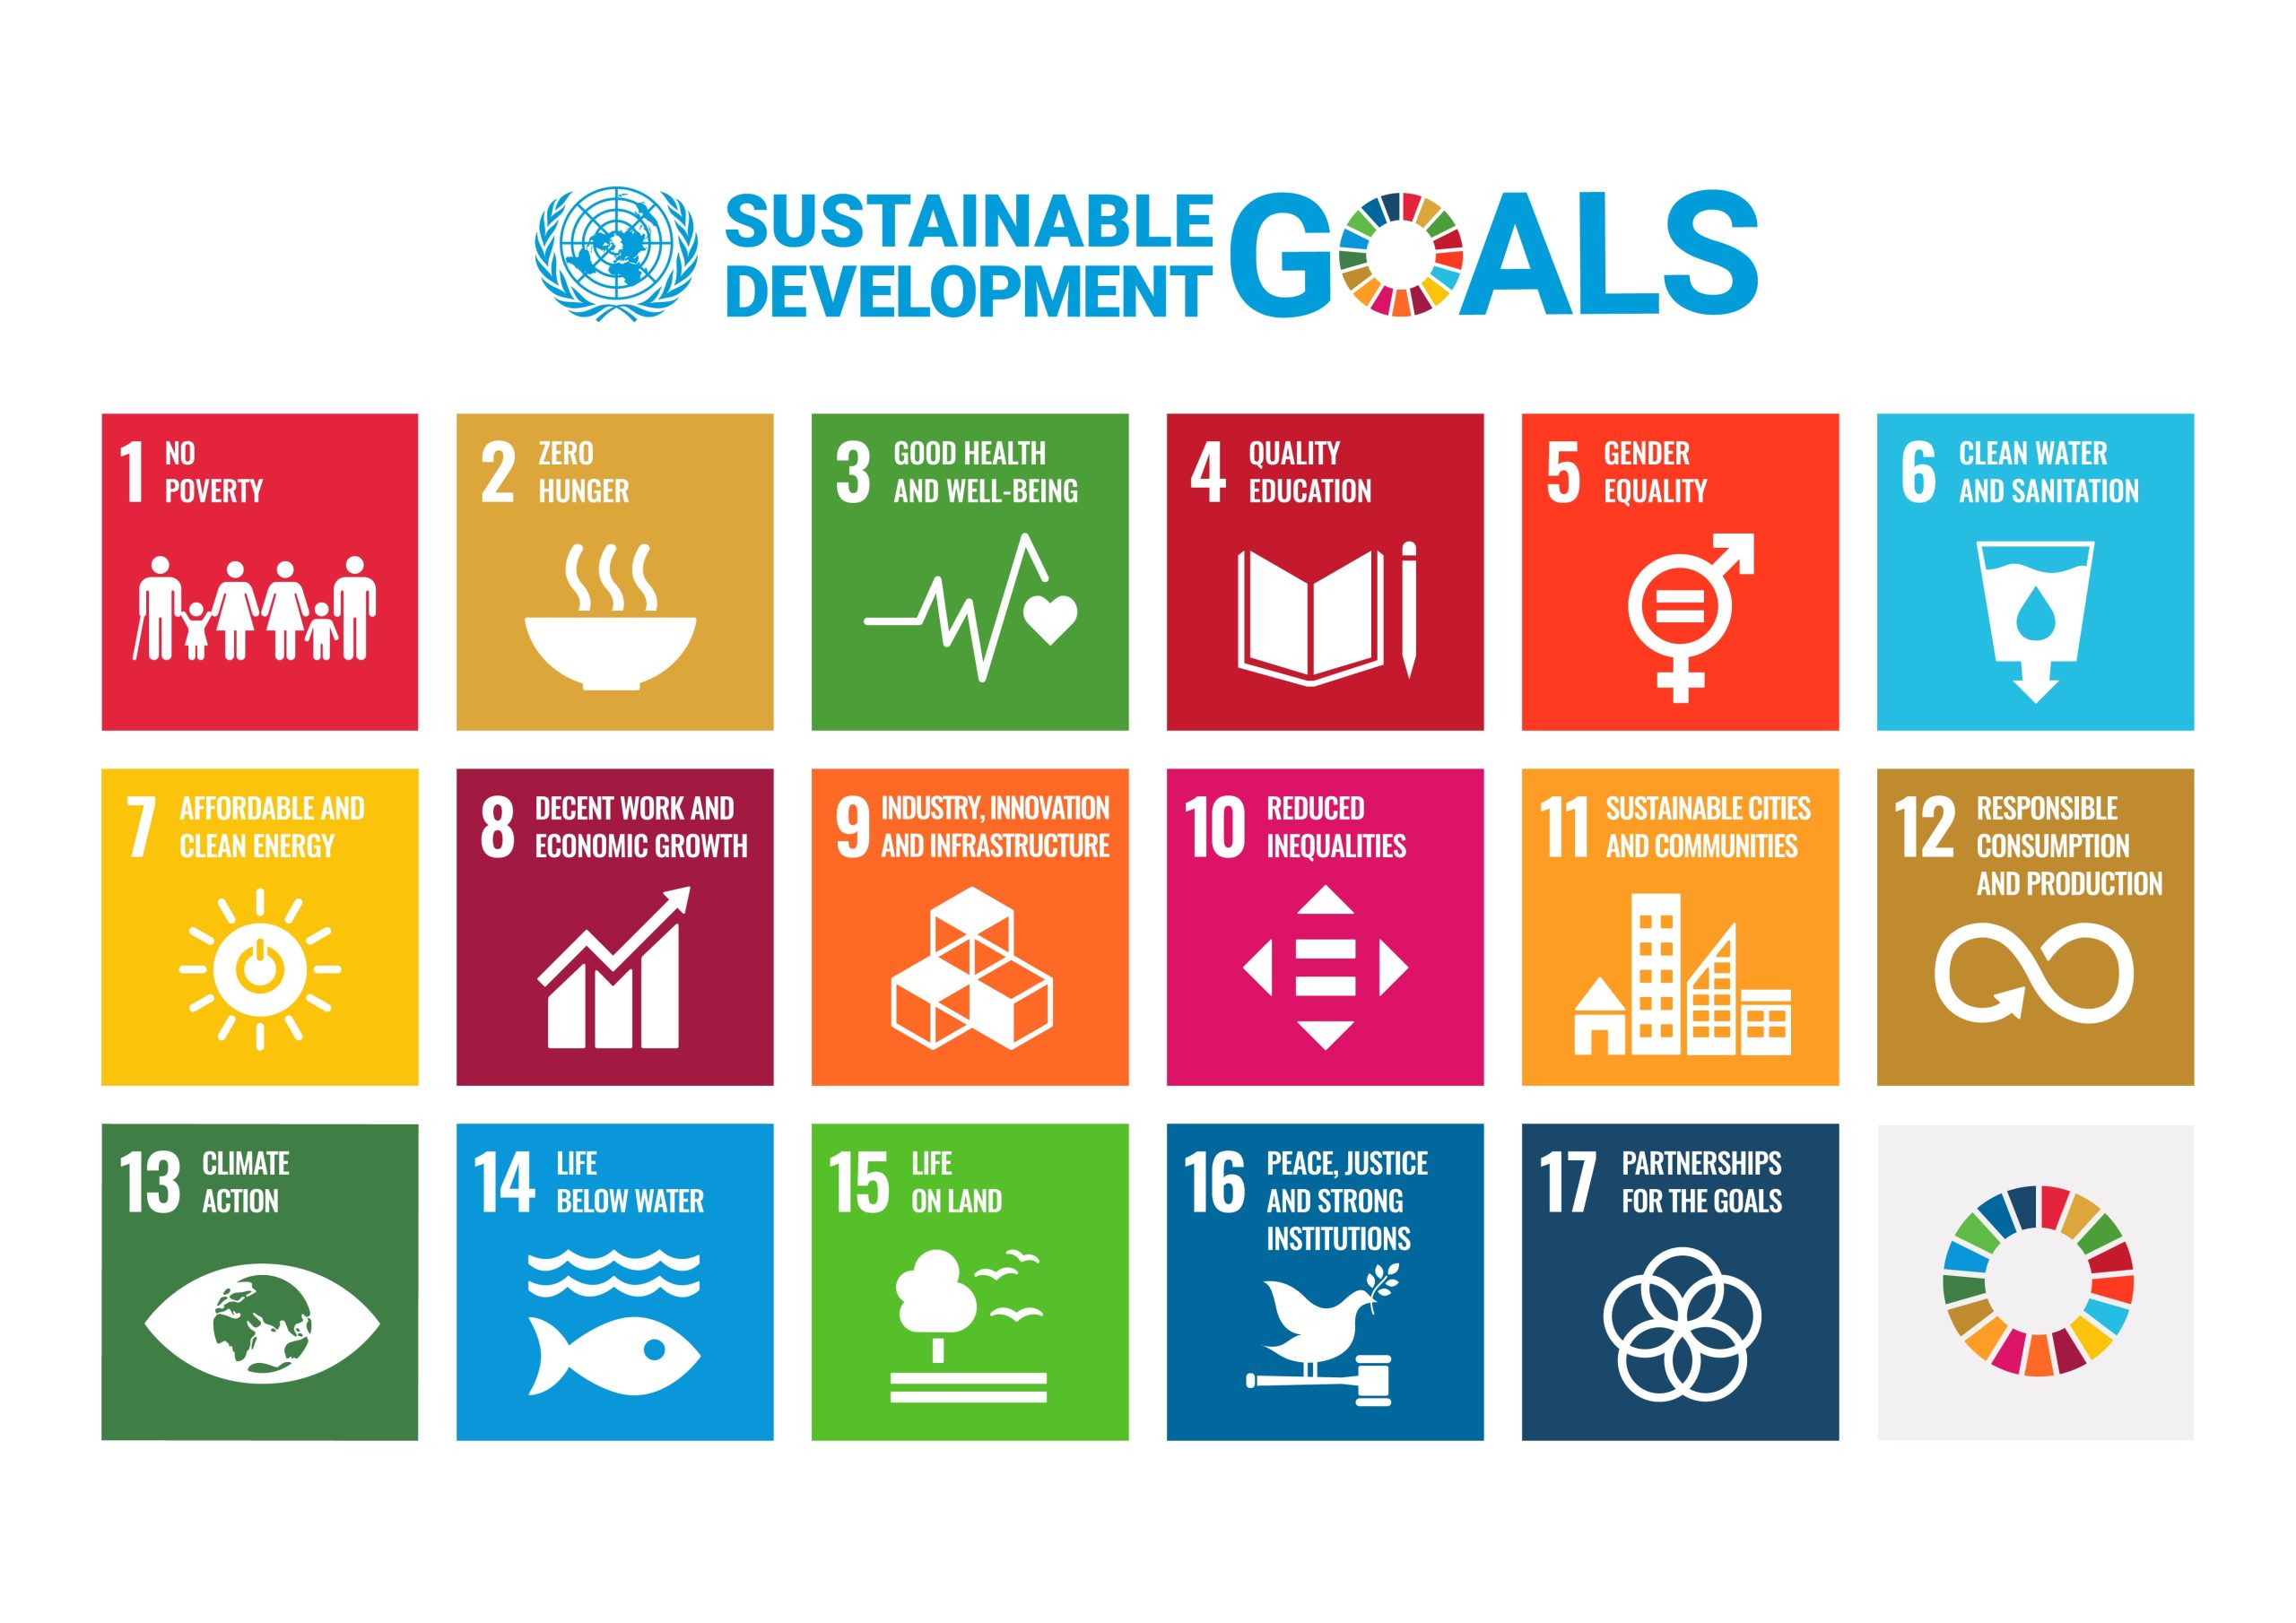 Image of grouped icons for all 17 UN Sustainable Development Goals (SDGs).